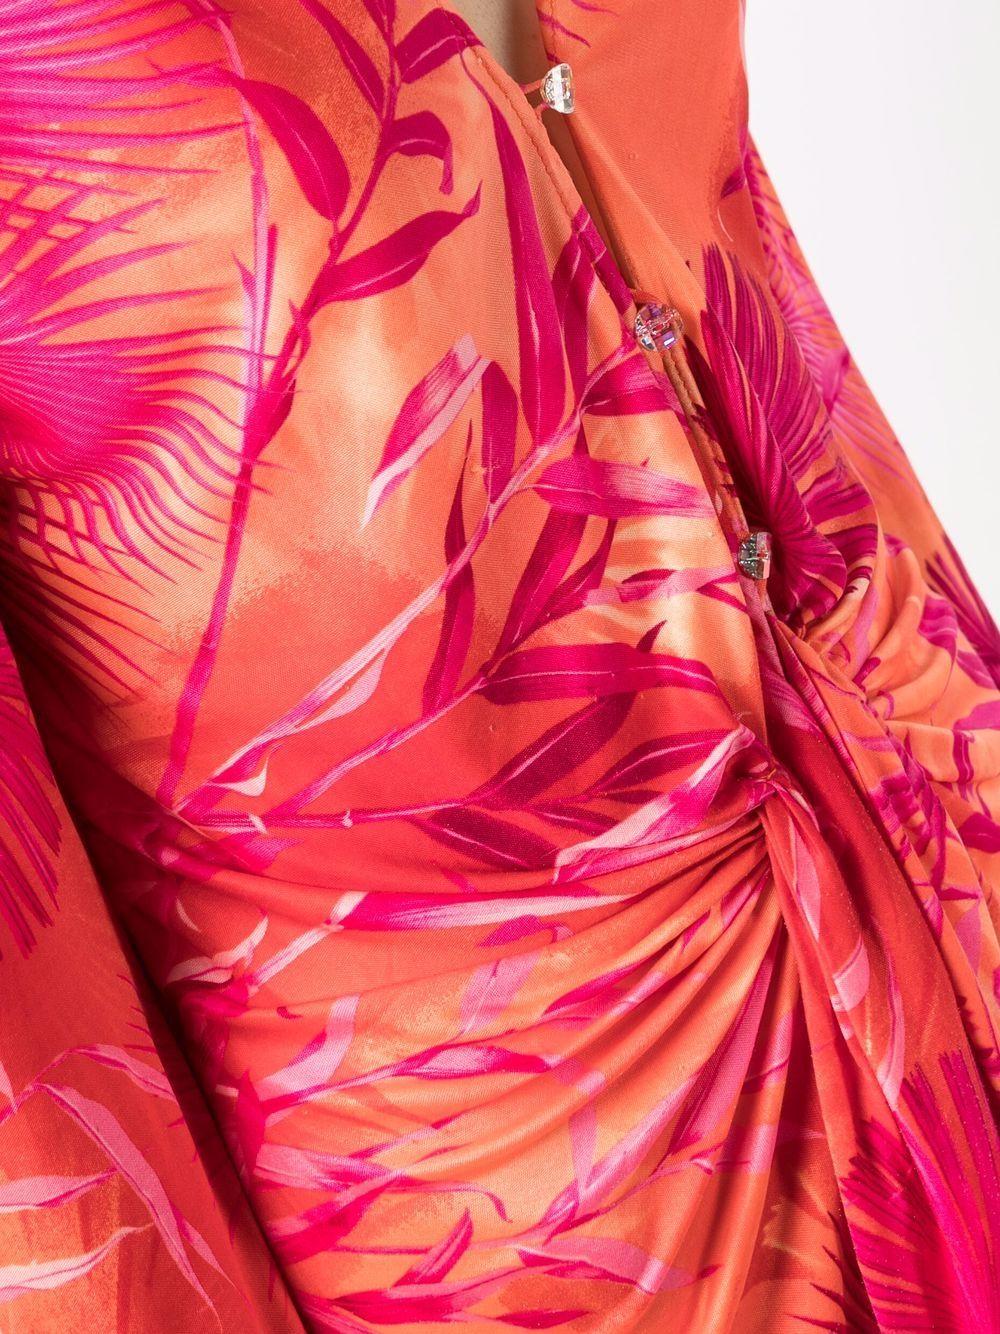 2000 Iconic Gianni Versace pink Jungle silk dress featuring a scoop neckline, can be worn unbuttoned for more of plunging neckline, crystal front button closure with sash ties at waist.
It was the dress and print made famous by Jennifer Lopez and